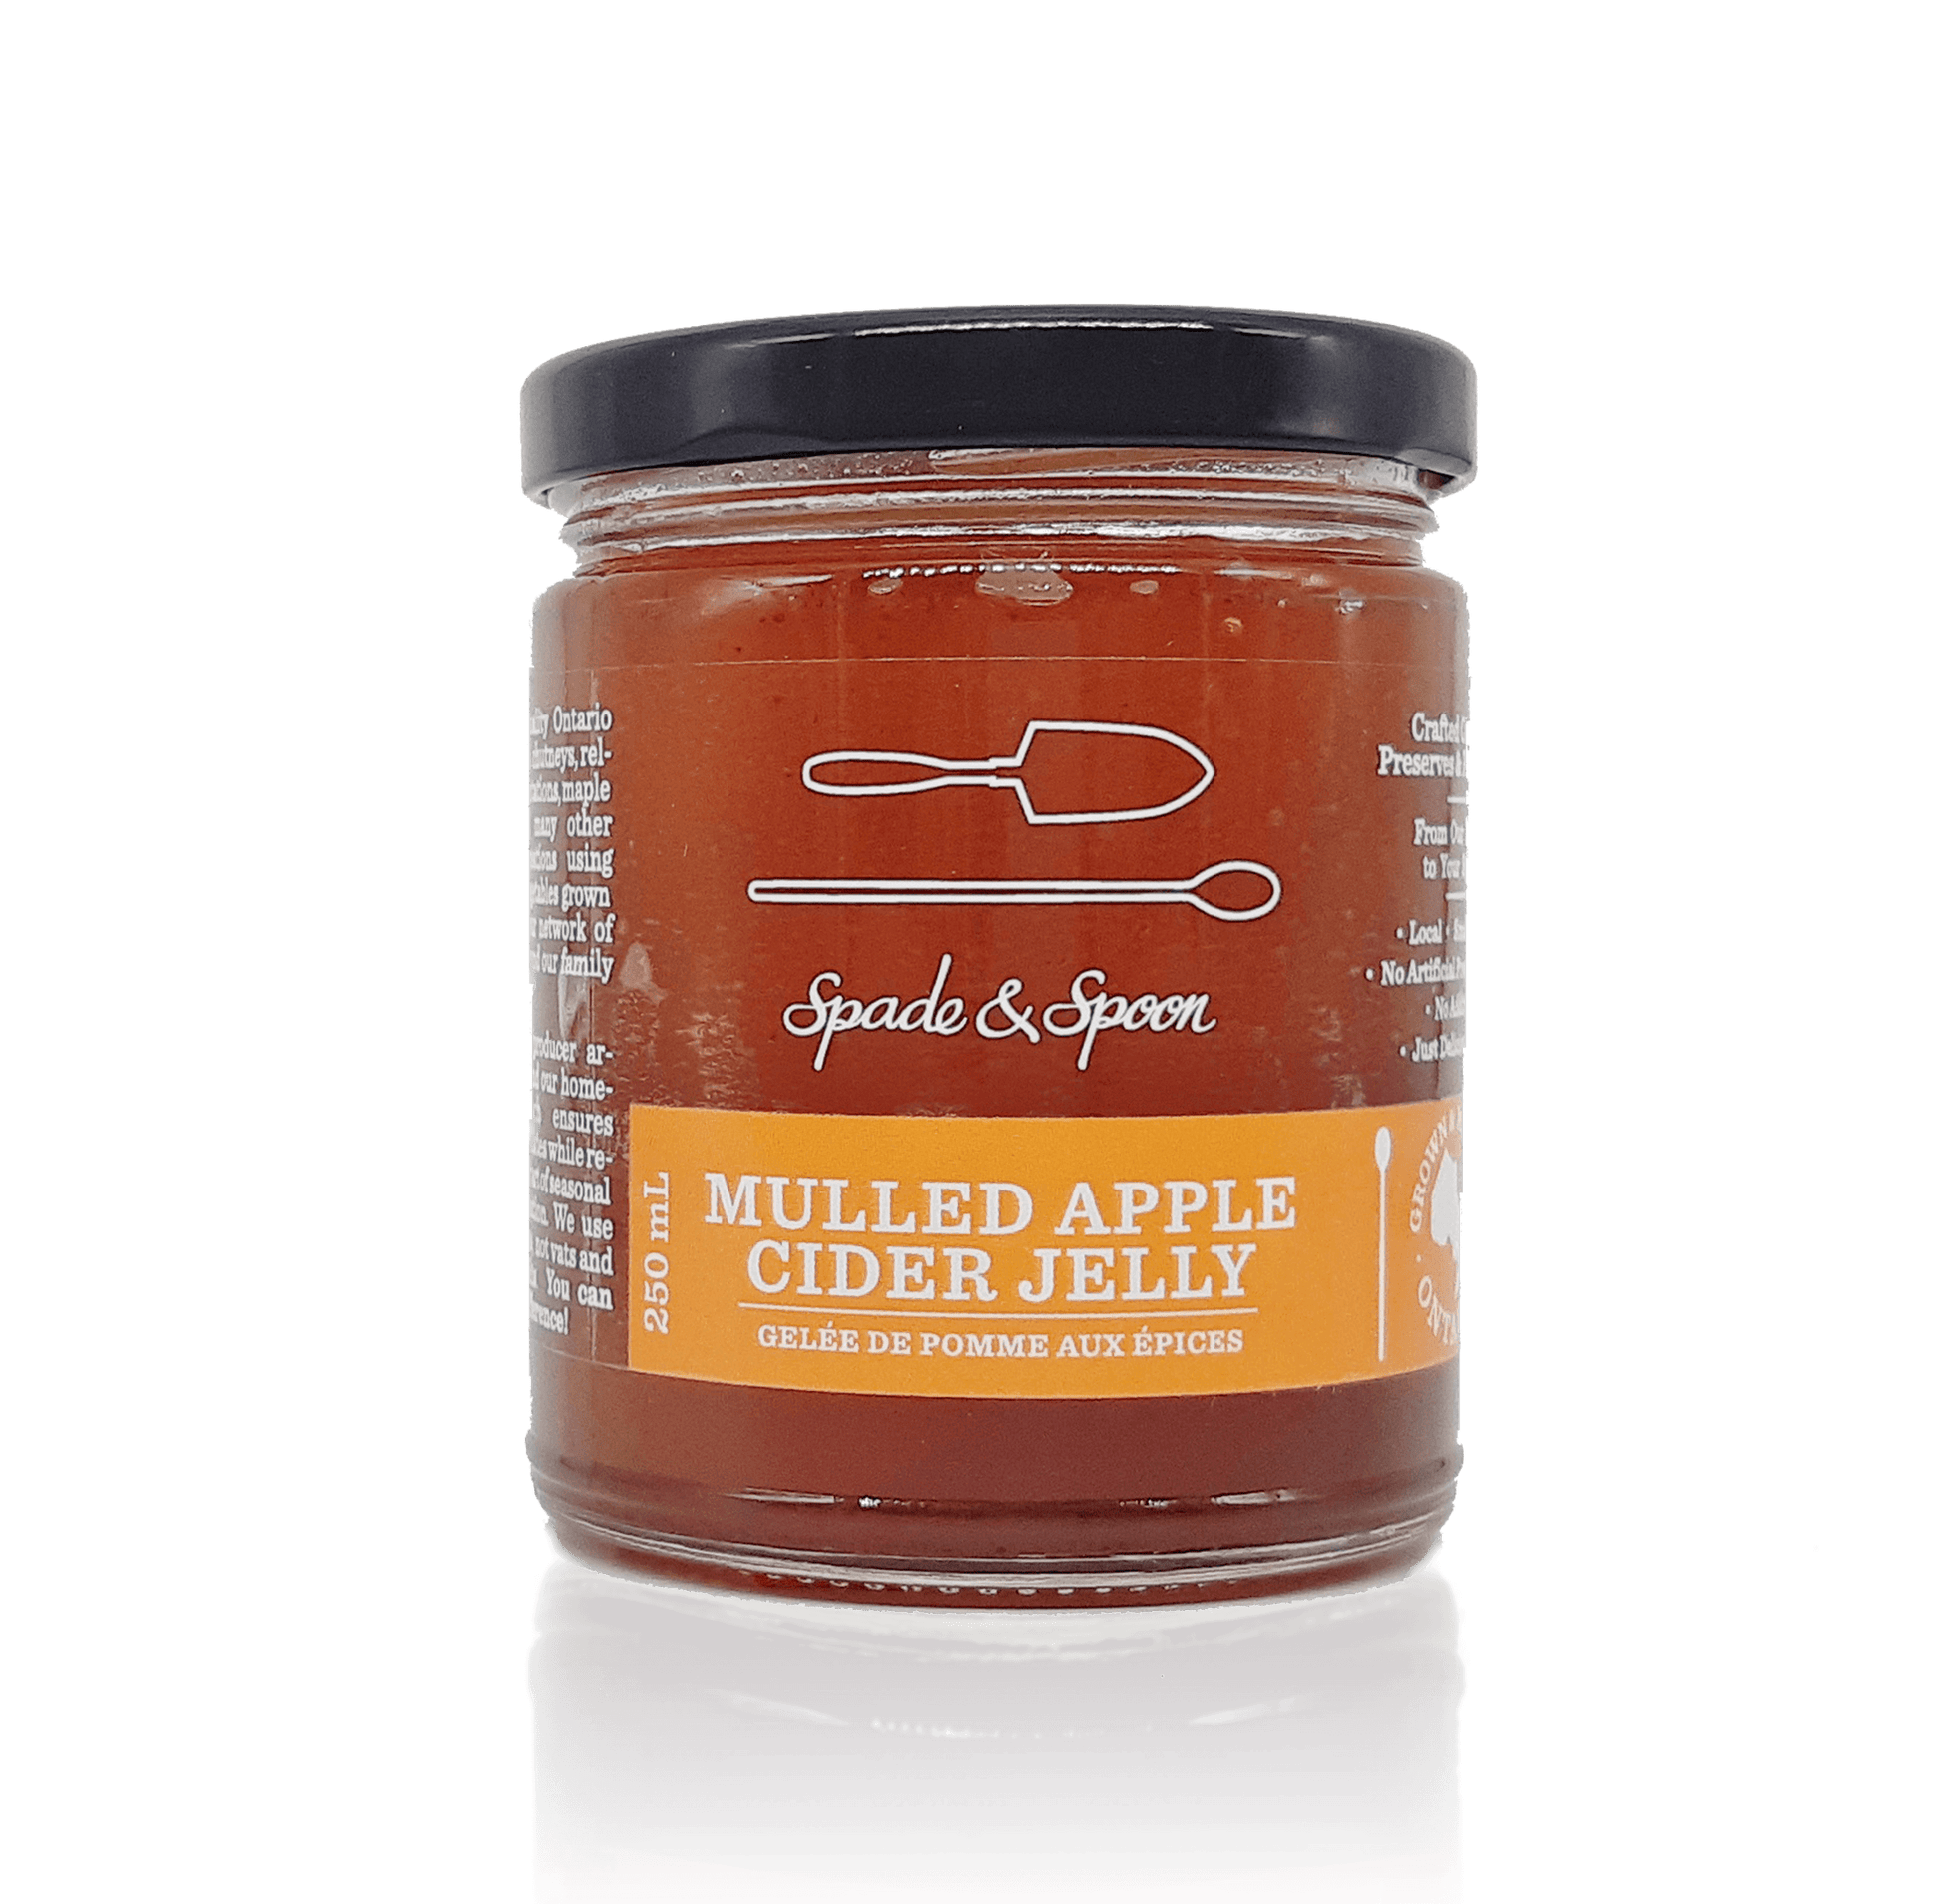 Mulled Apple Cider Jelly - Spade & Spoon - Ontario Farm Goods